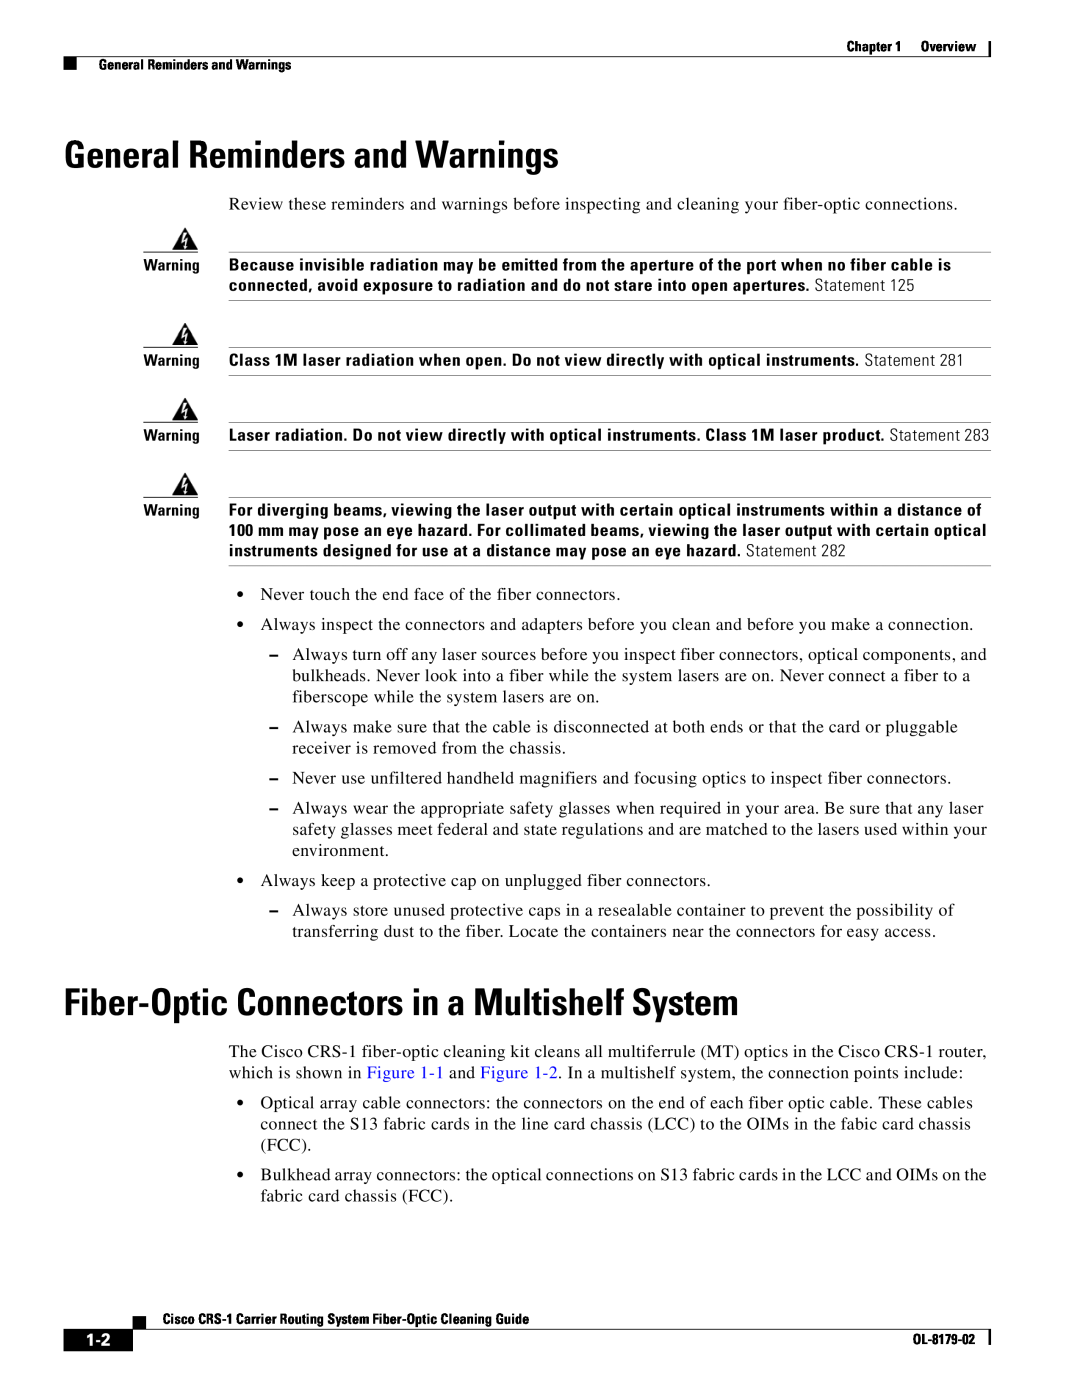 Cisco Systems CRS-1 manual General Reminders and Warnings, Fiber-OpticConnectors in a Multishelf System 